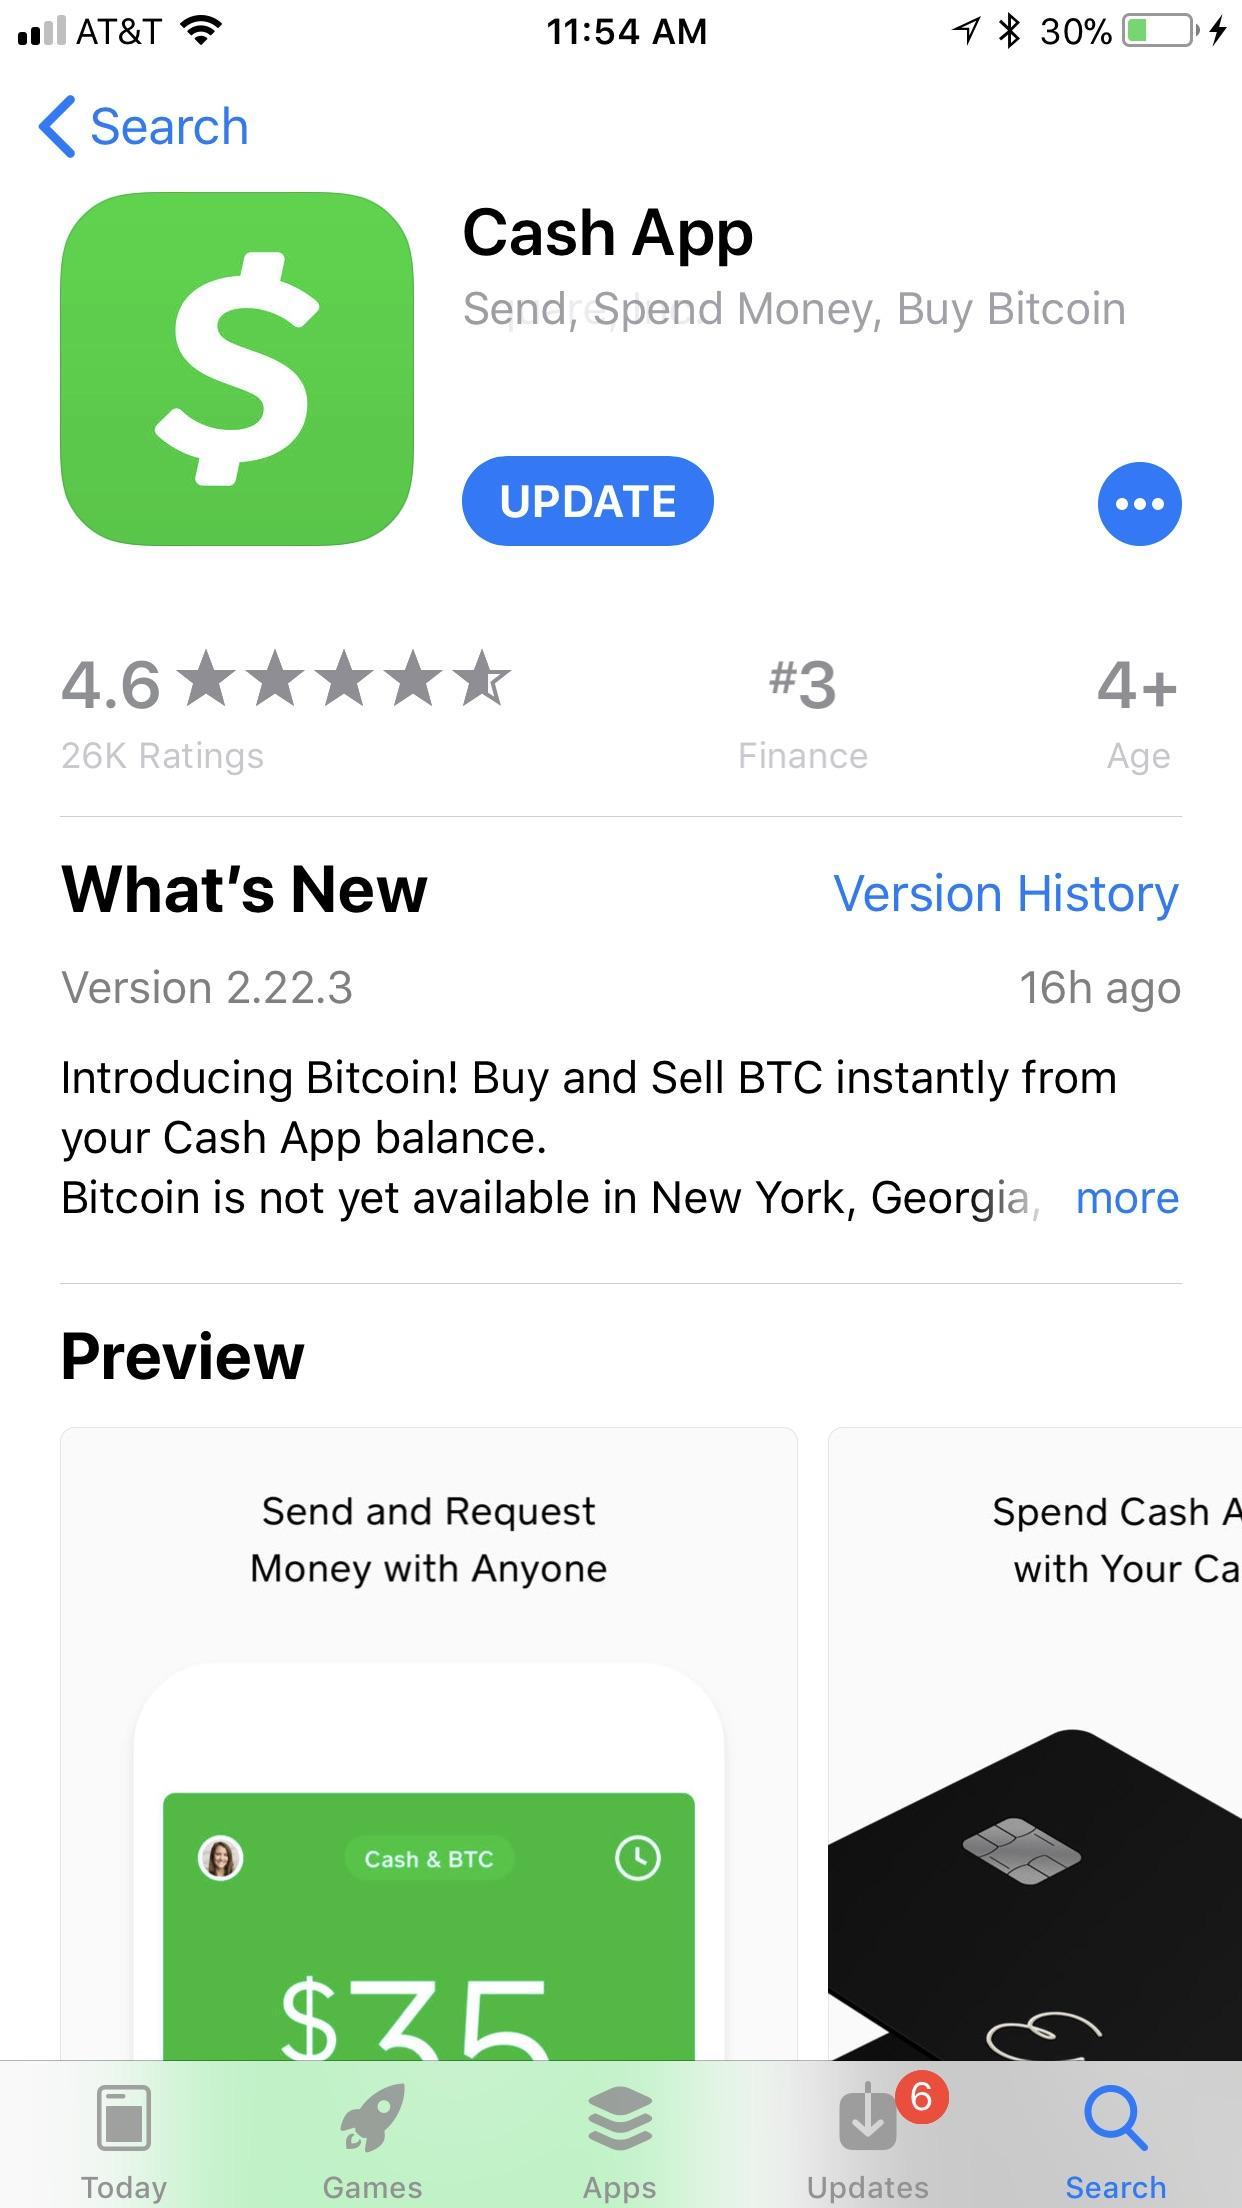 Transfer Cash App Logo - Cash App added BTC purchases, need to get them to add LTC as well